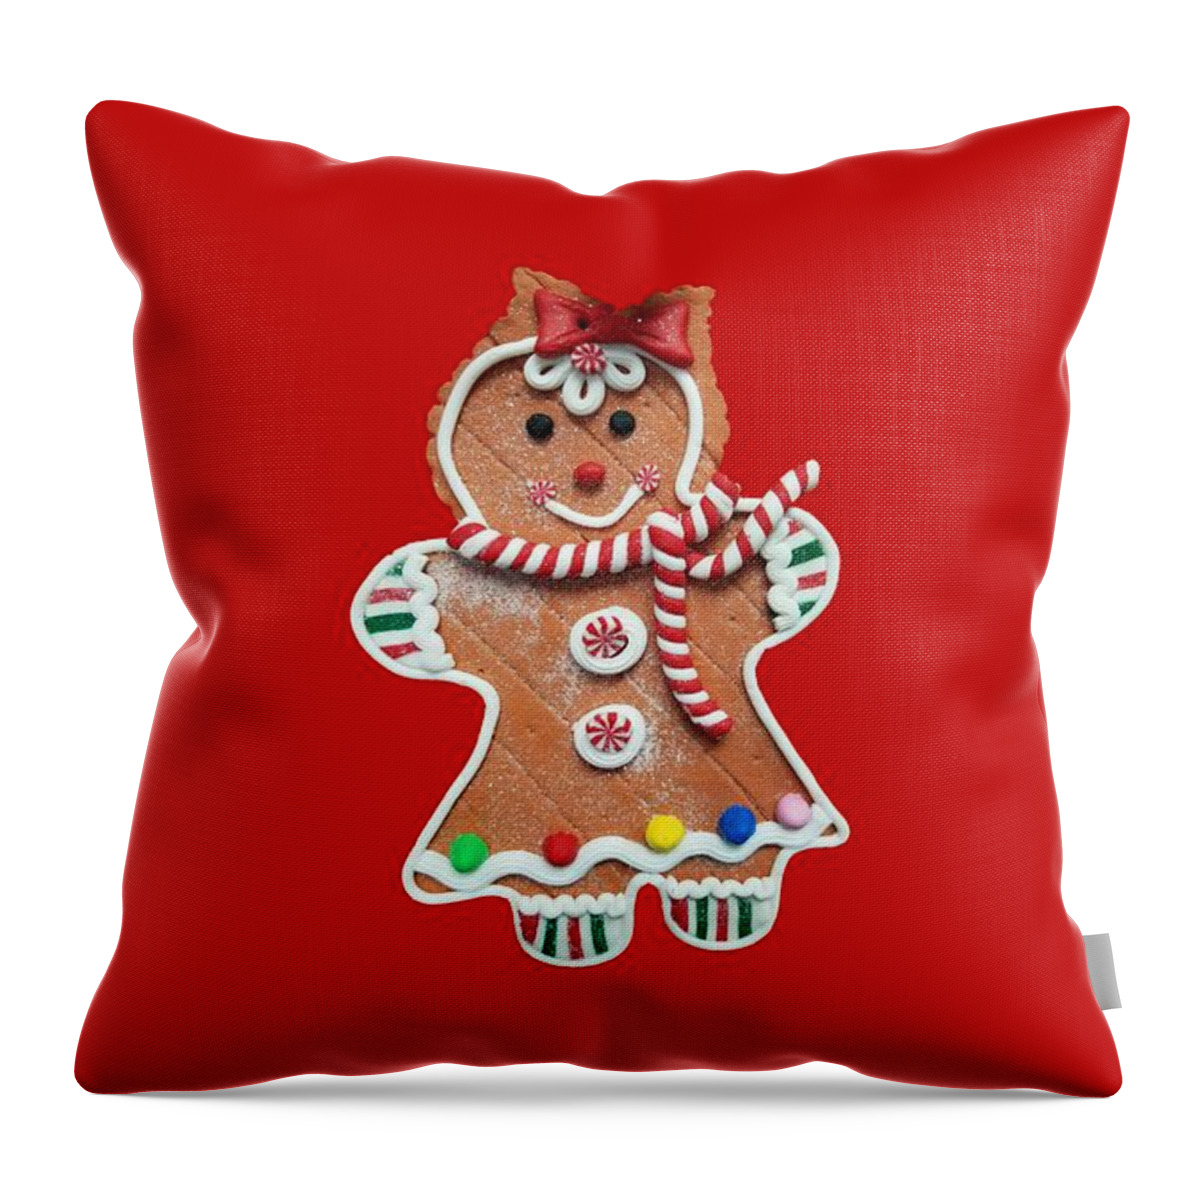 Gingerbread Throw Pillow featuring the photograph Gingerbread Cookie Girl by Rachel Hannah